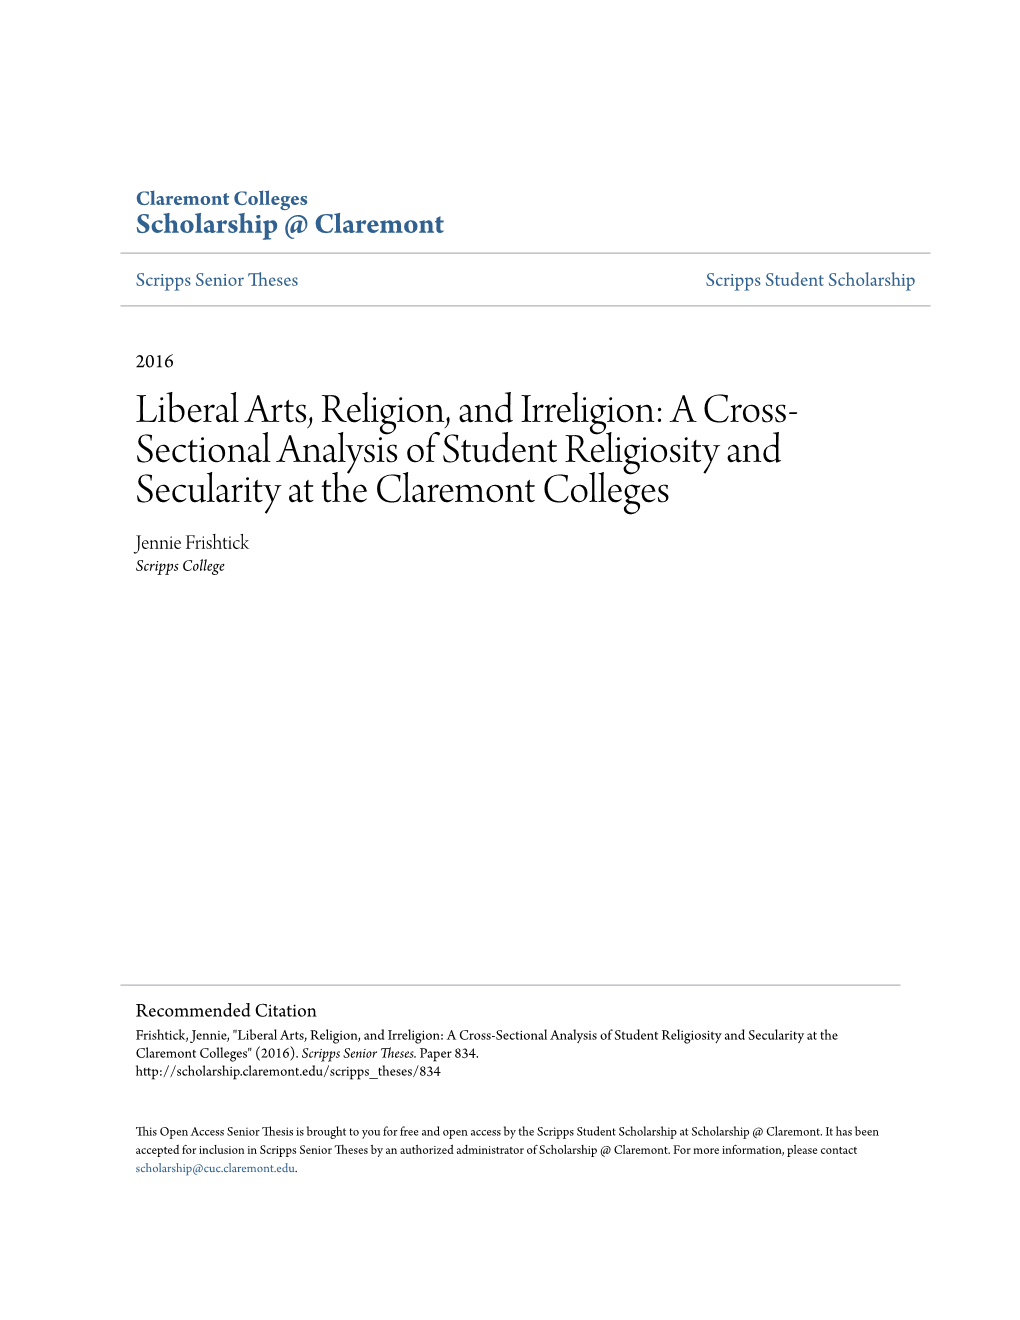 Liberal Arts, Religion, and Irreligion: a Cross- Sectional Analysis of Student Religiosity and Secularity at the Claremont Colleges Jennie Frishtick Scripps College